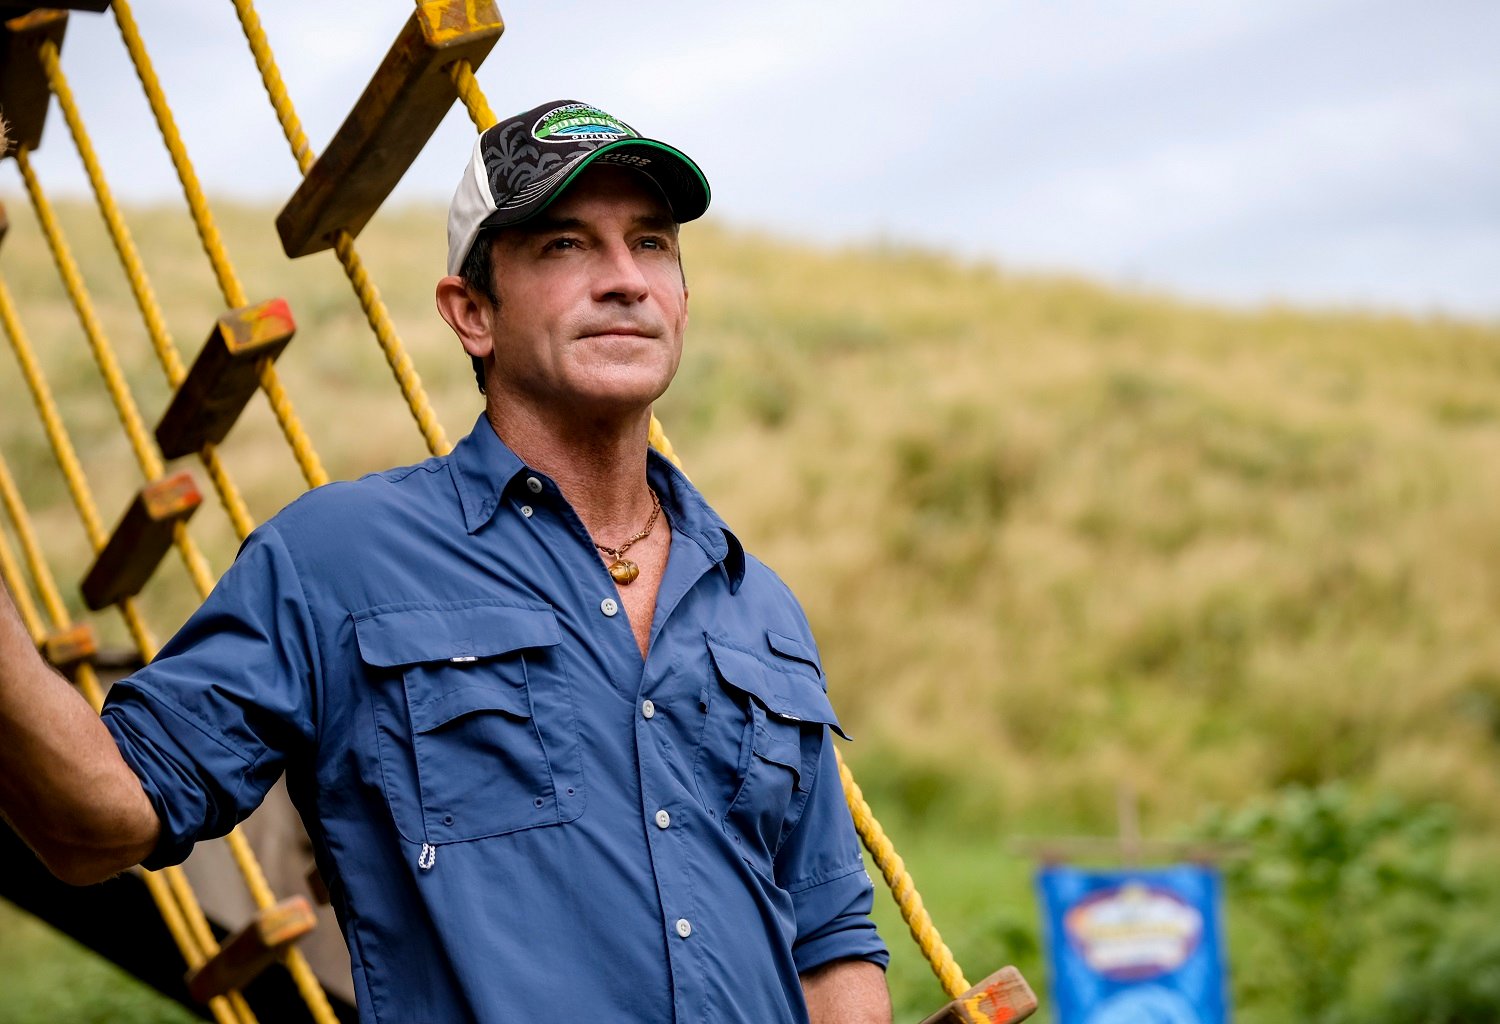 Jeff Probst, host of Survivor 41 wearing a blue button down, standing on a boat, looking into the distance